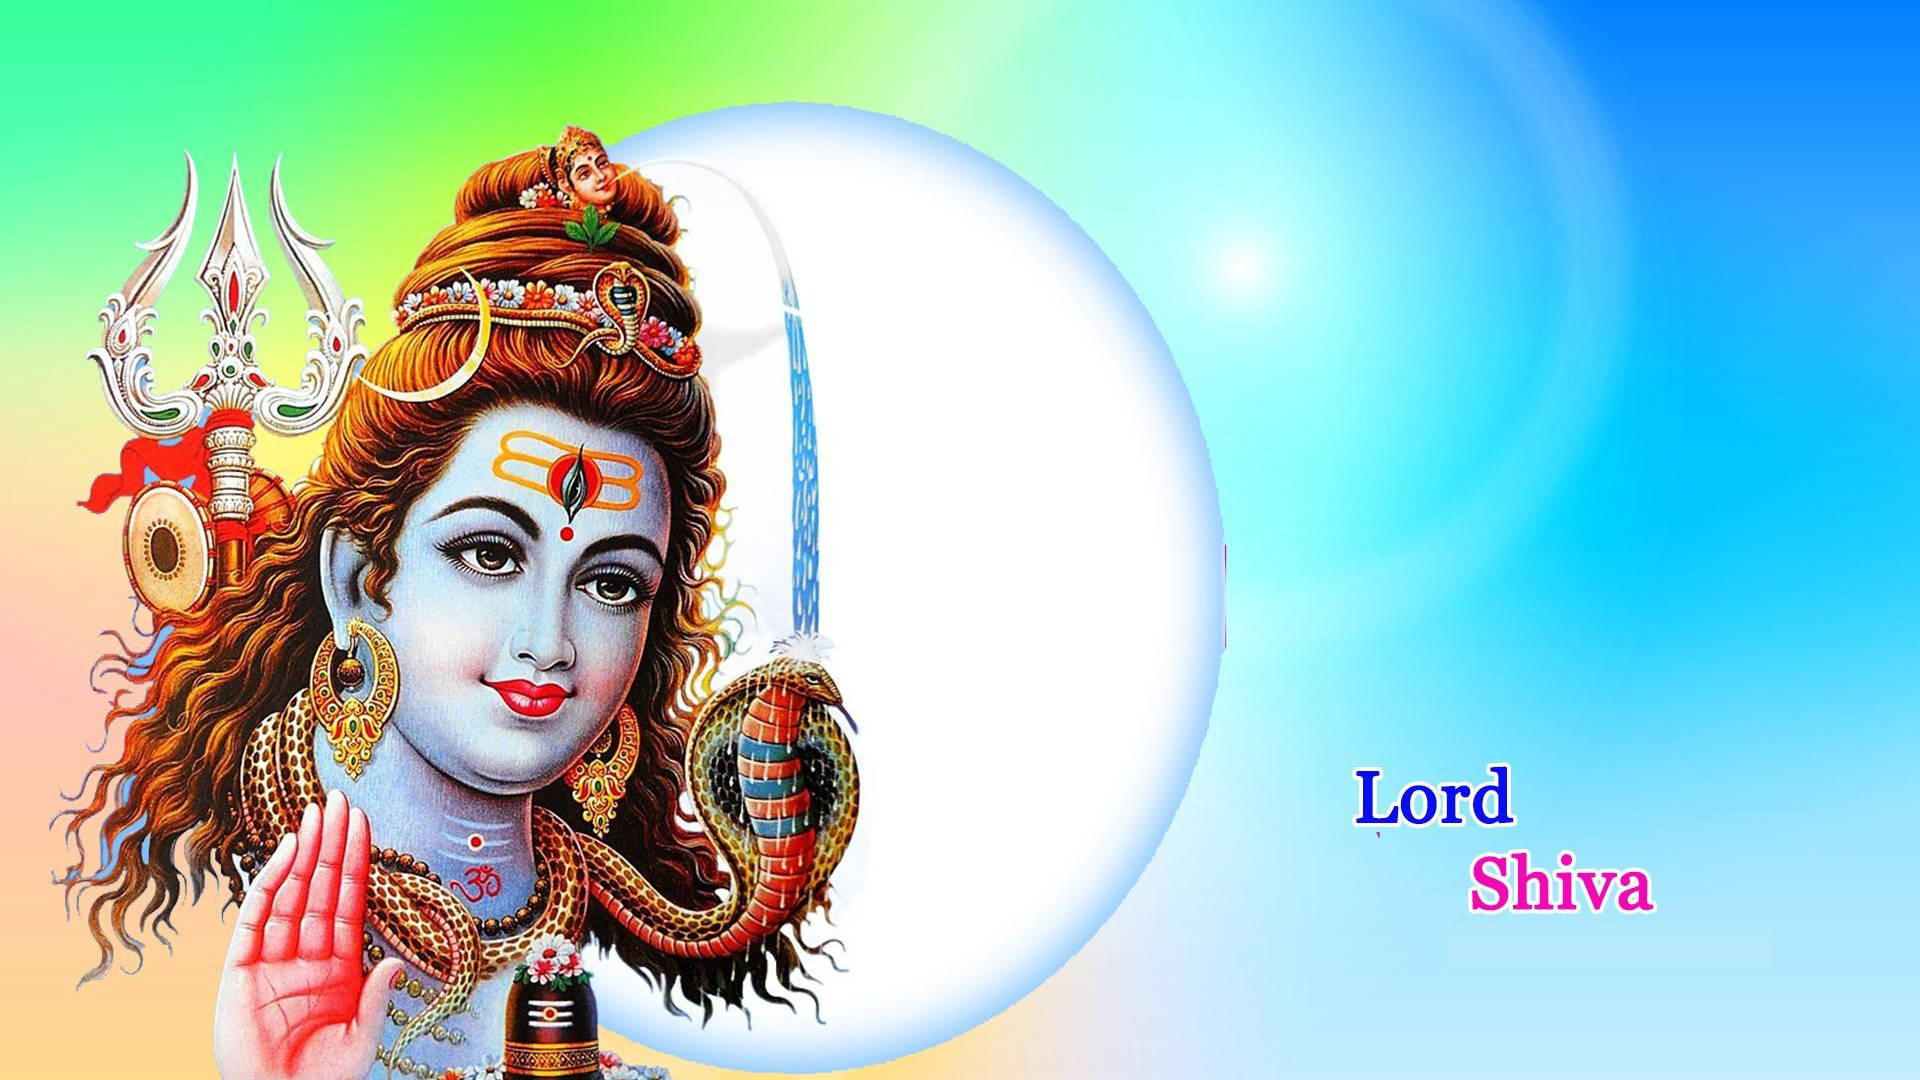 Free Lord Shiva Wallpaper Downloads, [300+] Lord Shiva Wallpapers for FREE  